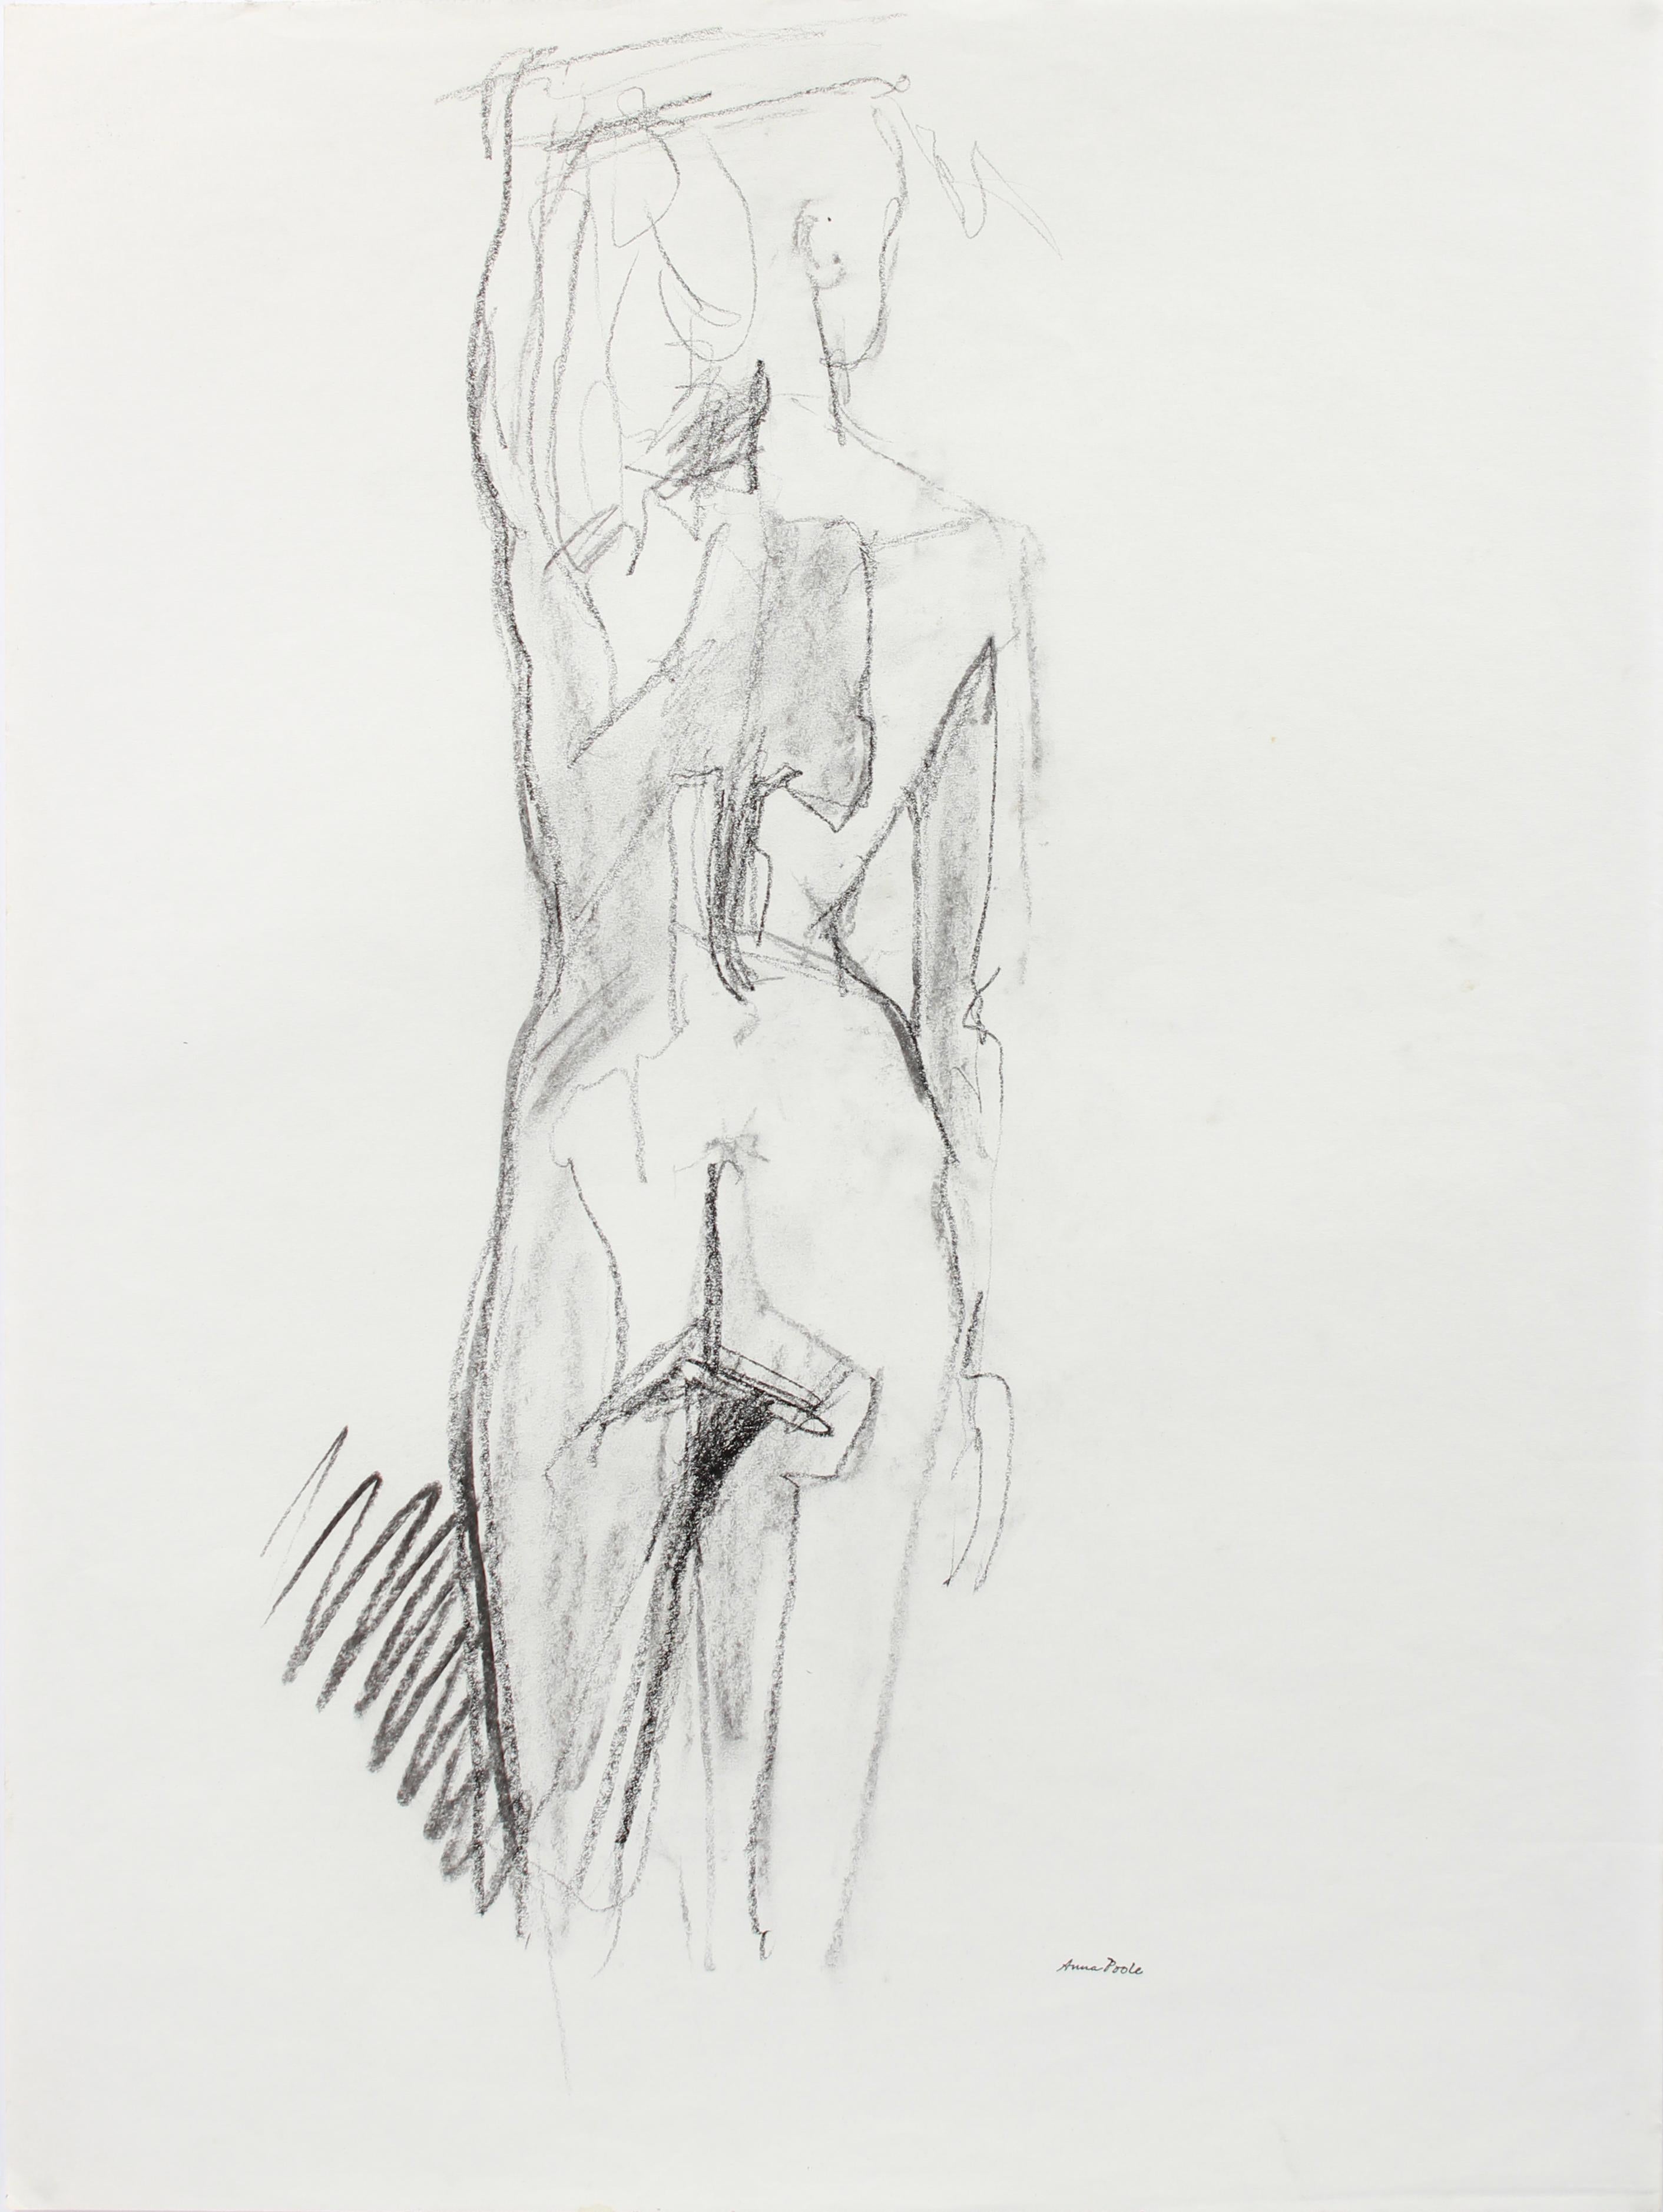 Nude Female Figure from Behind, Graphite on Paper Drawing, Late 20th Century - Art by Anna Poole